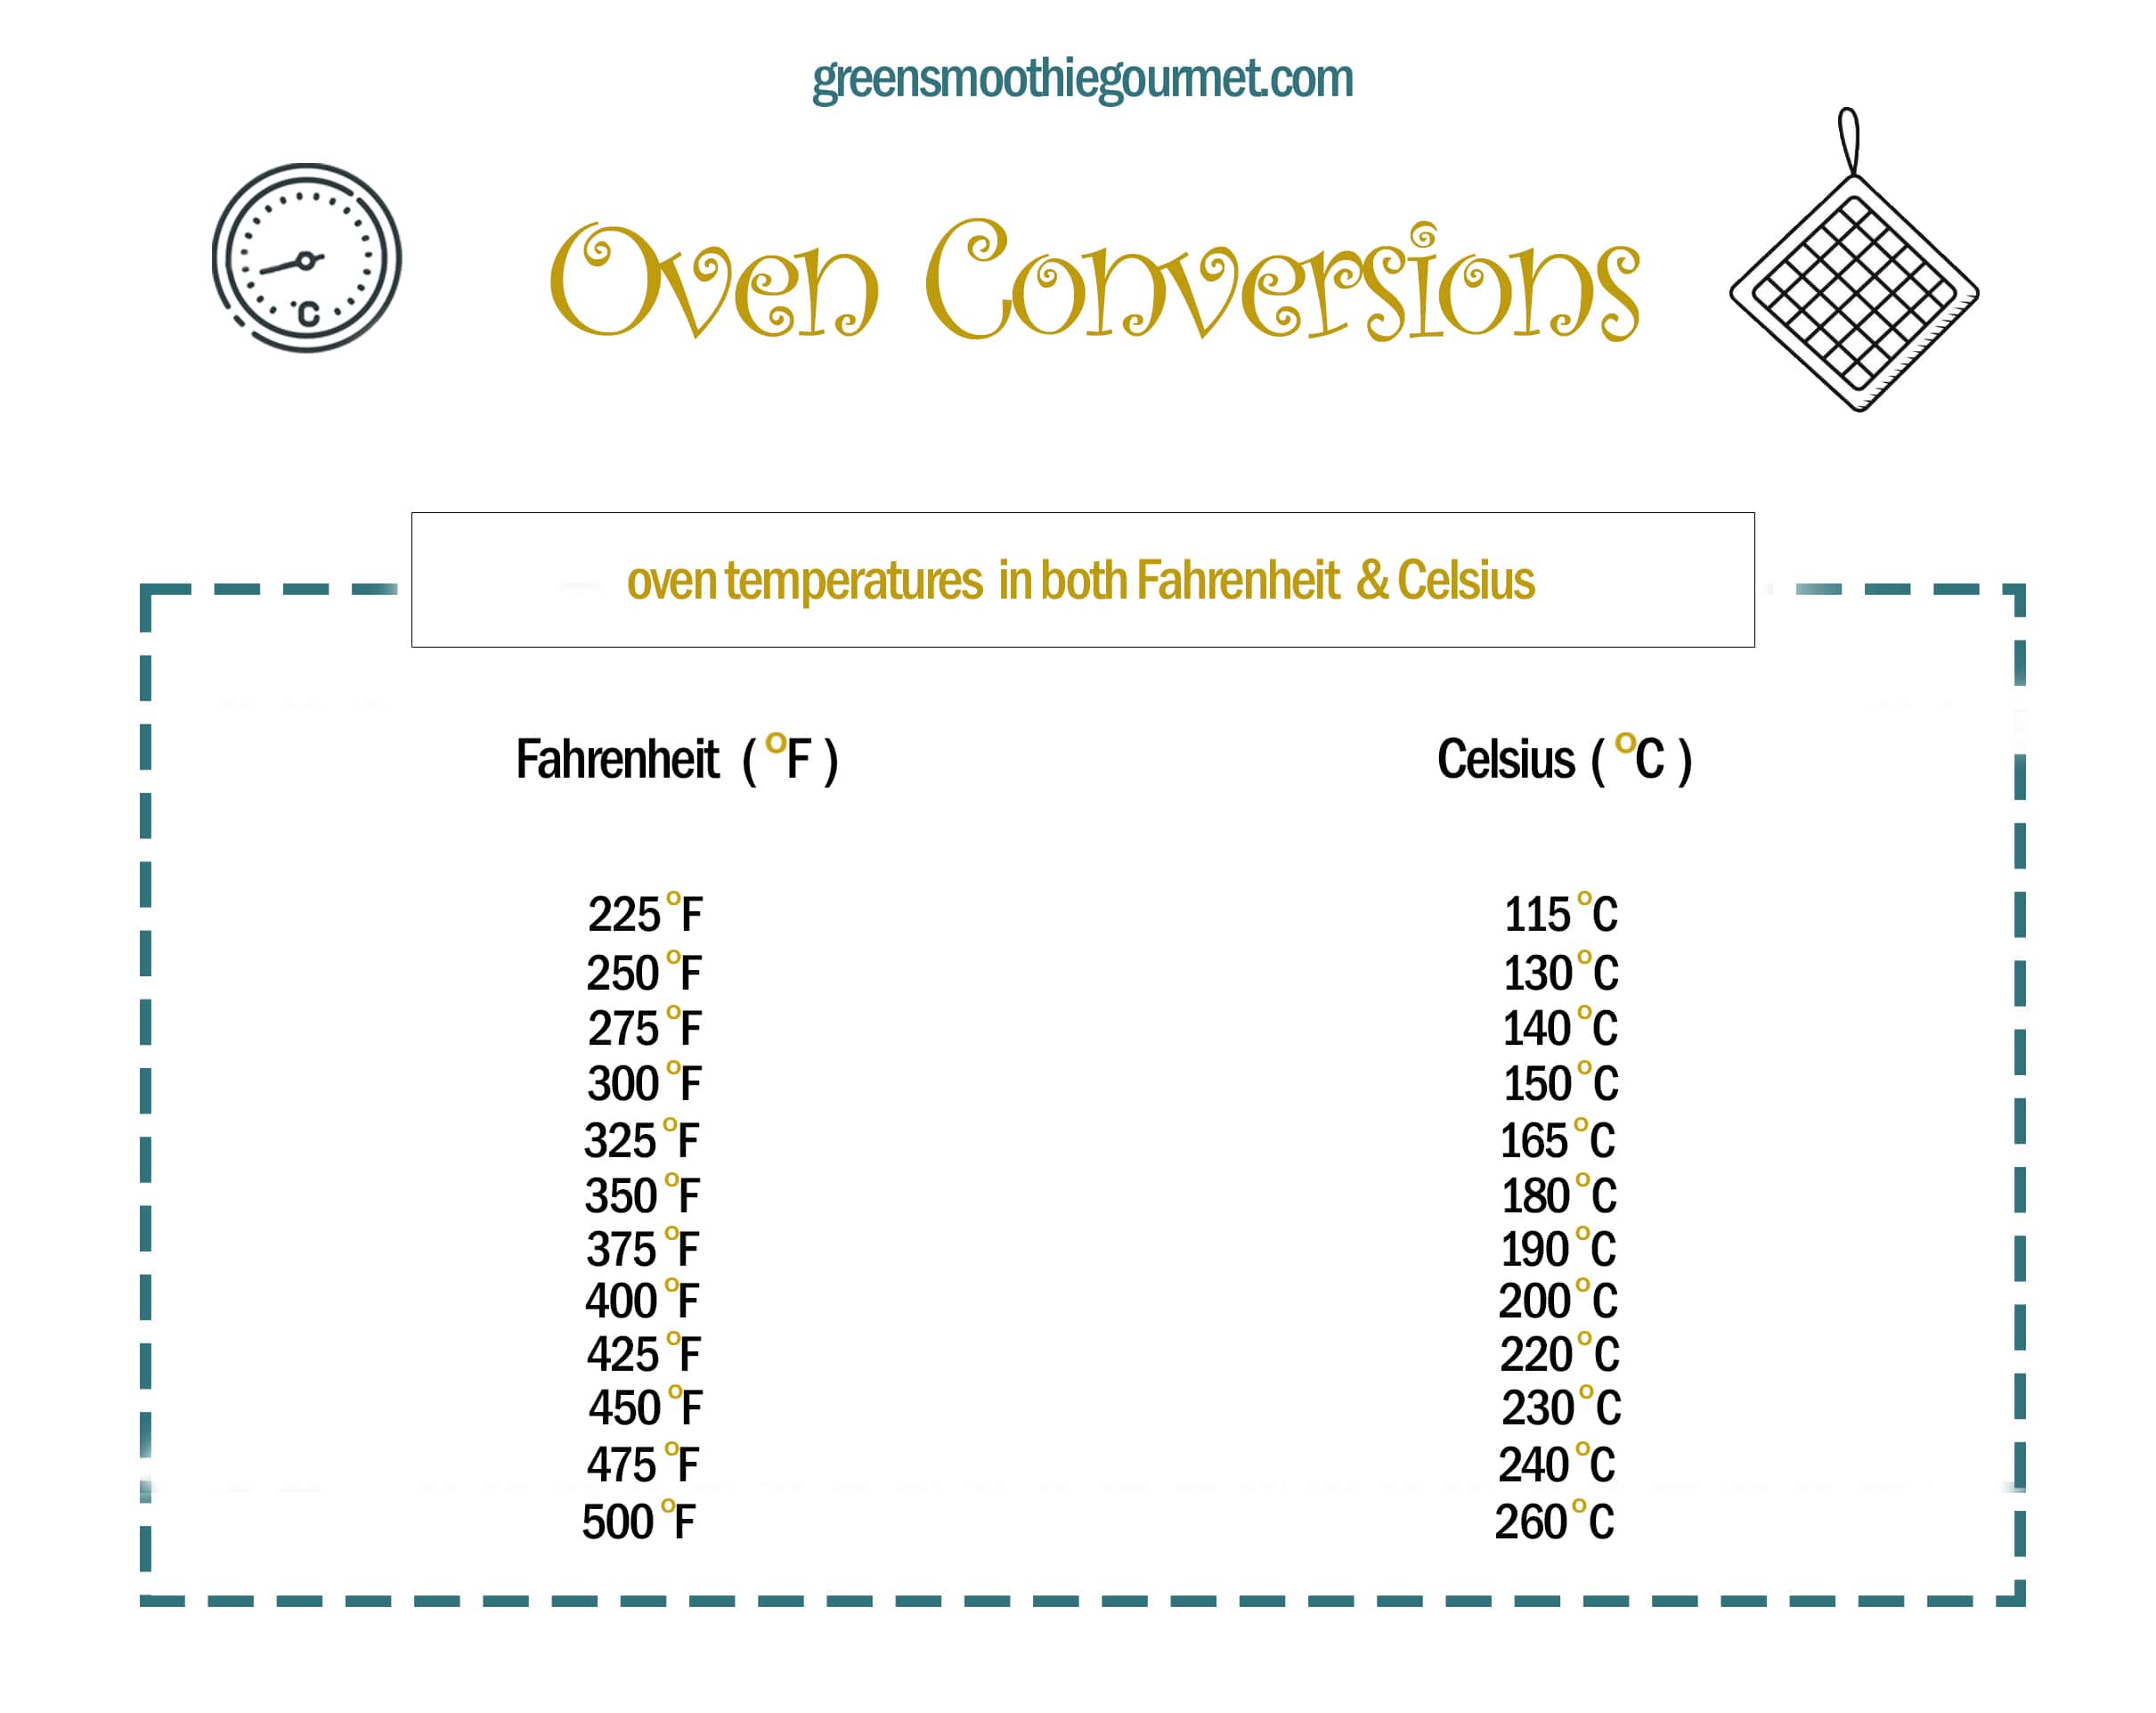 oven conversions for celsius to fahrenheit.